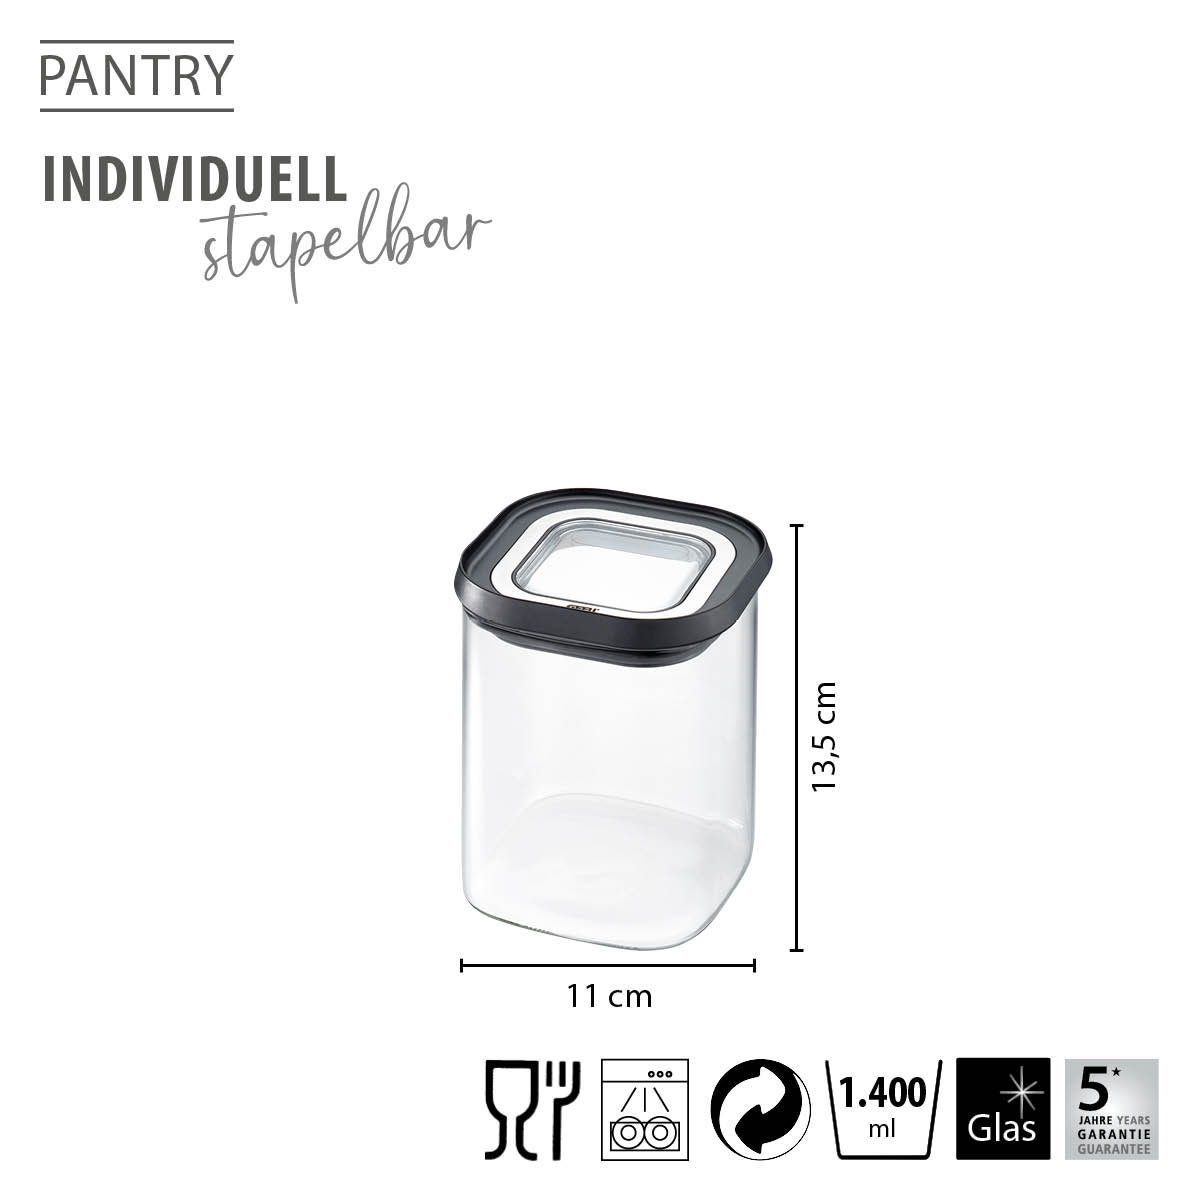 Food storage container PANTRY, 900 ml